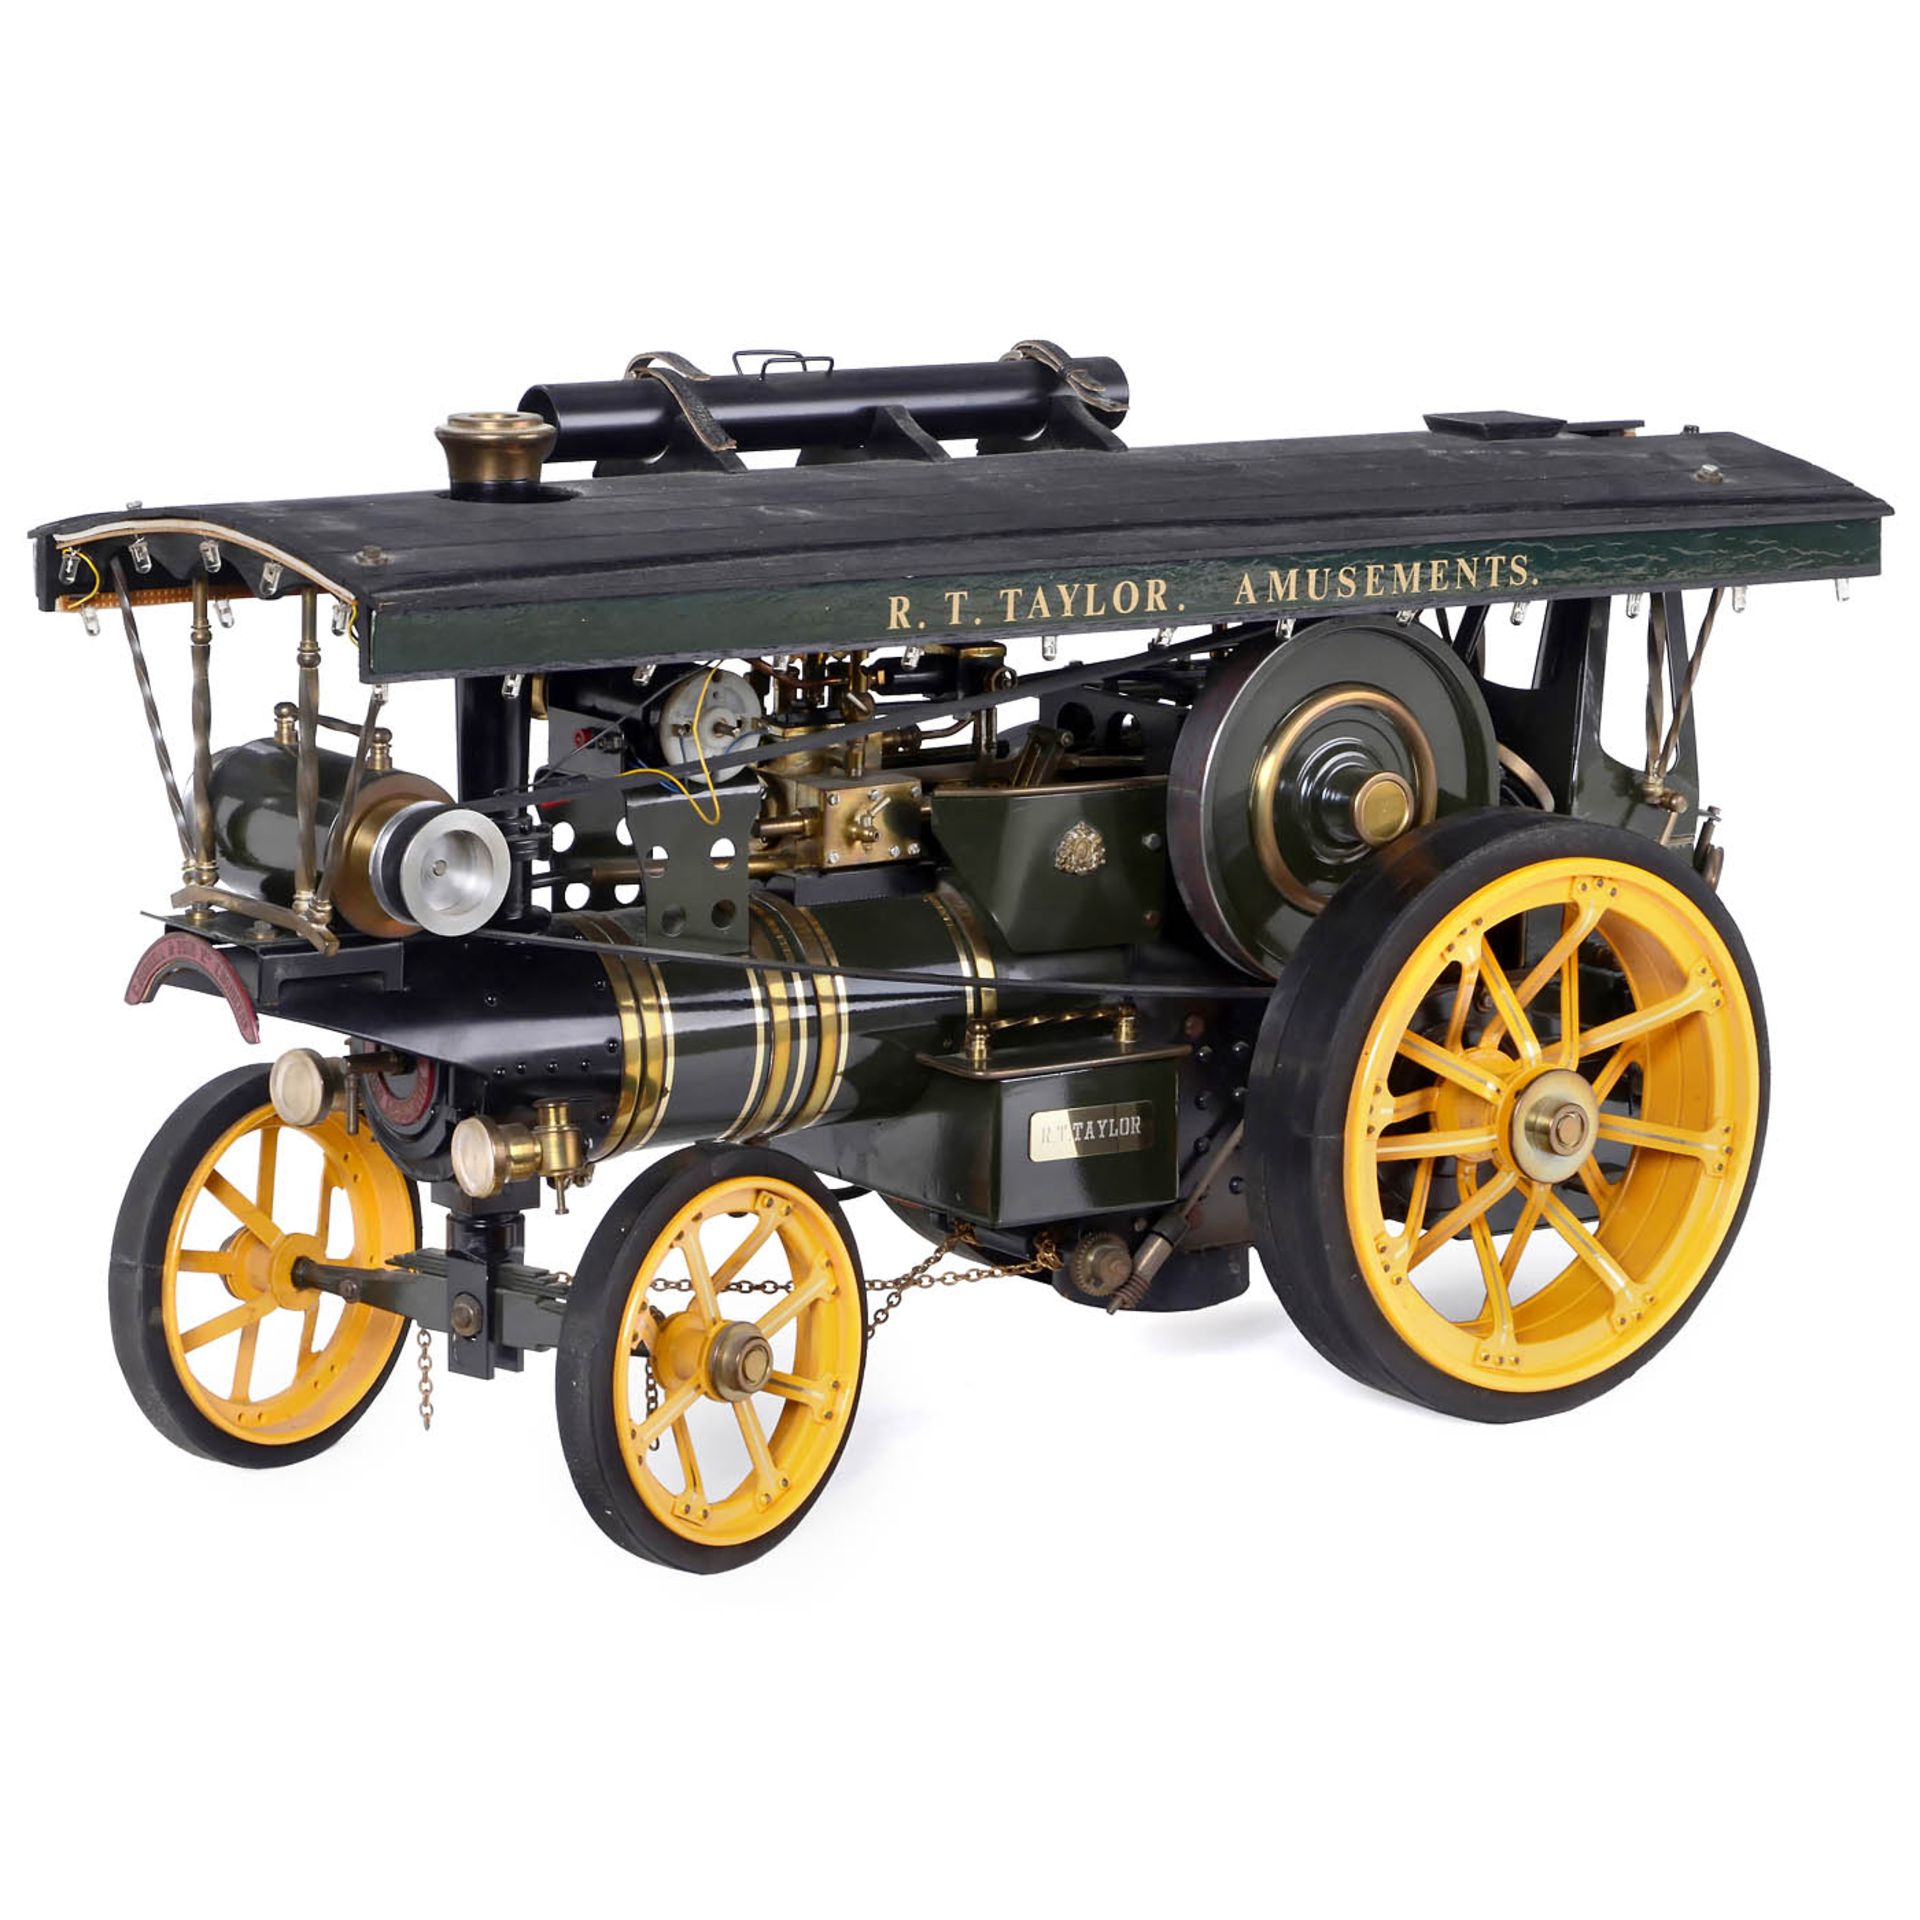 1 1/8-Inch Scale Model of a Burrell Scenic Steam Showman’s Engine